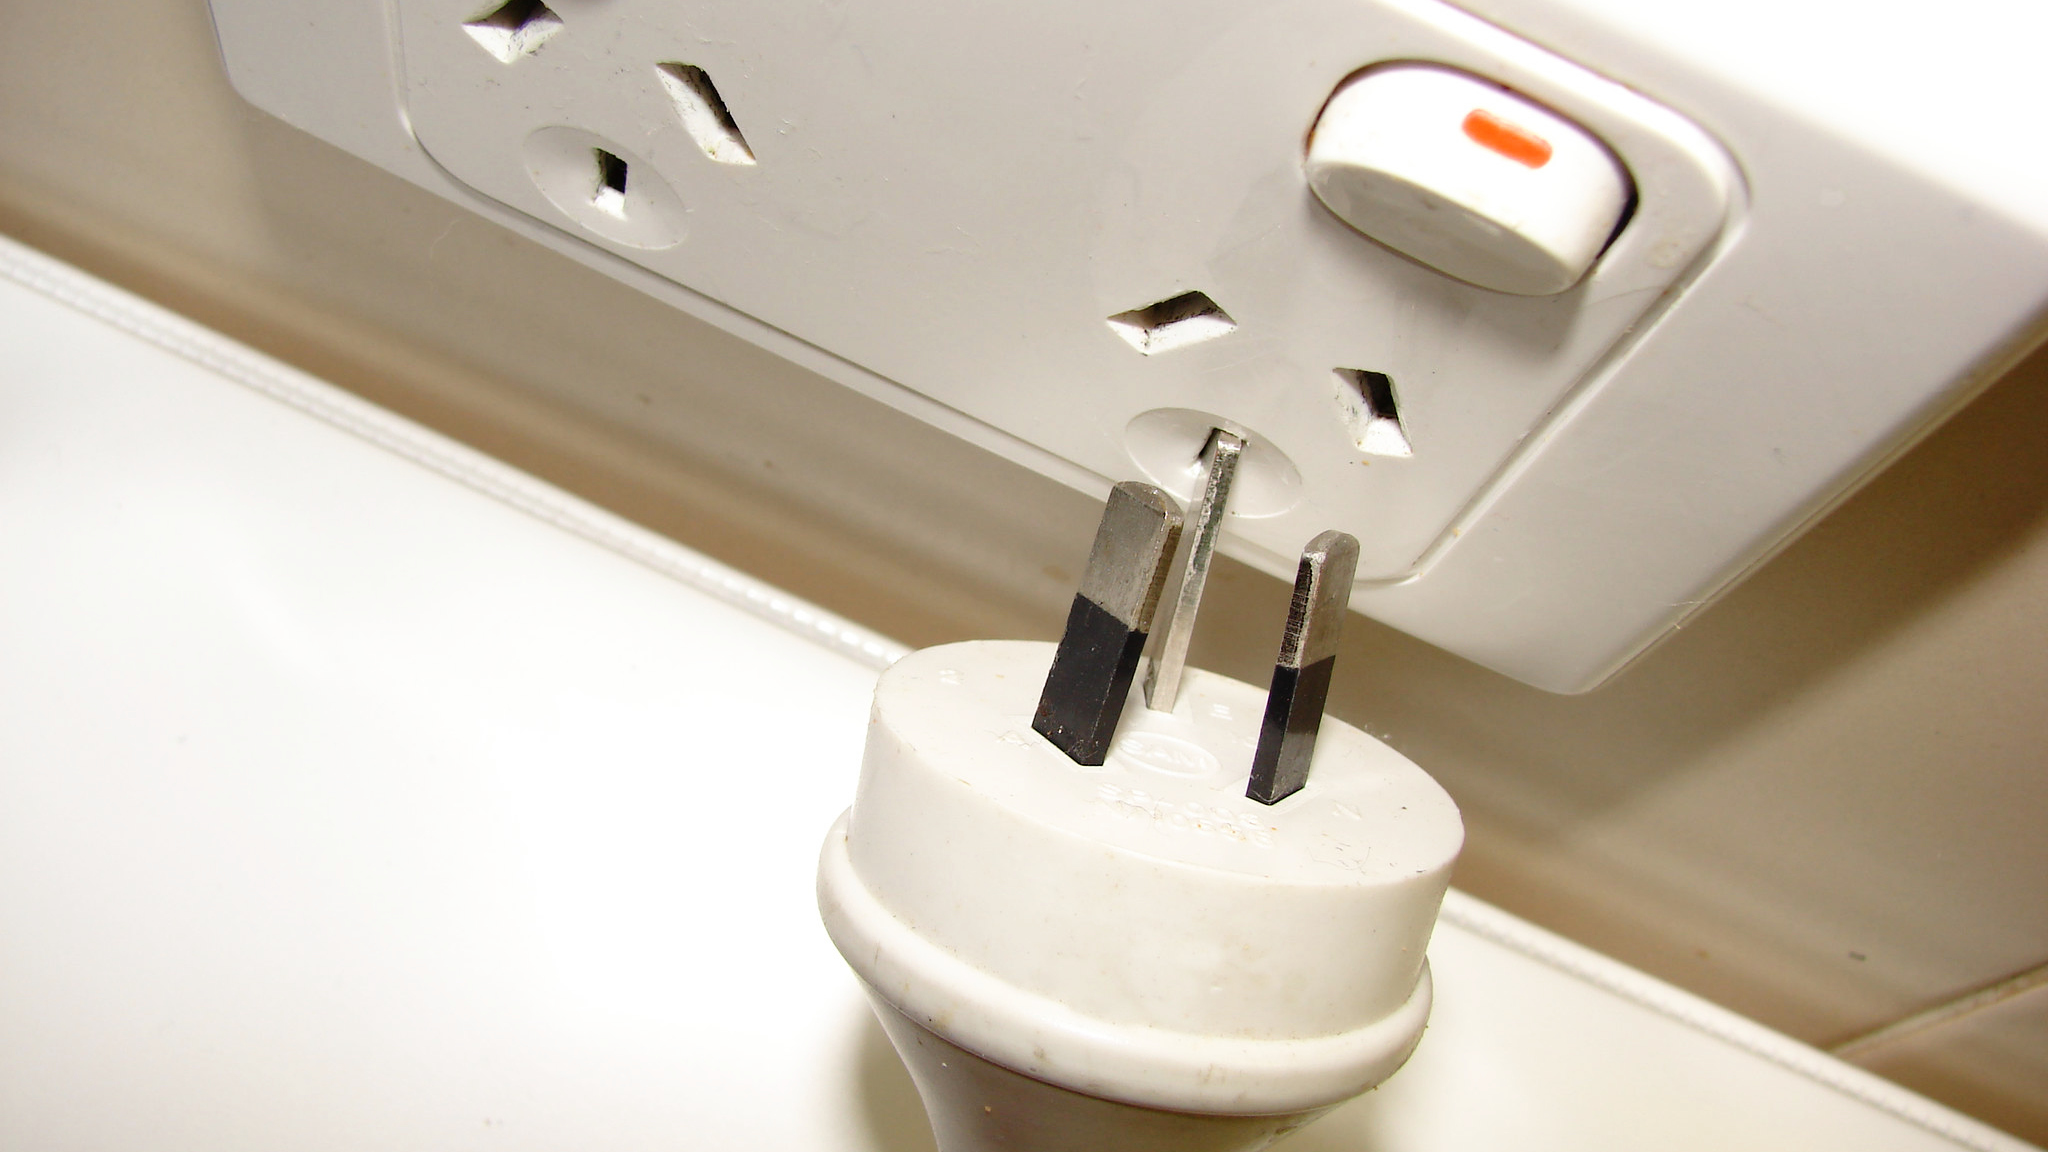 Saving electricity tips and tricks